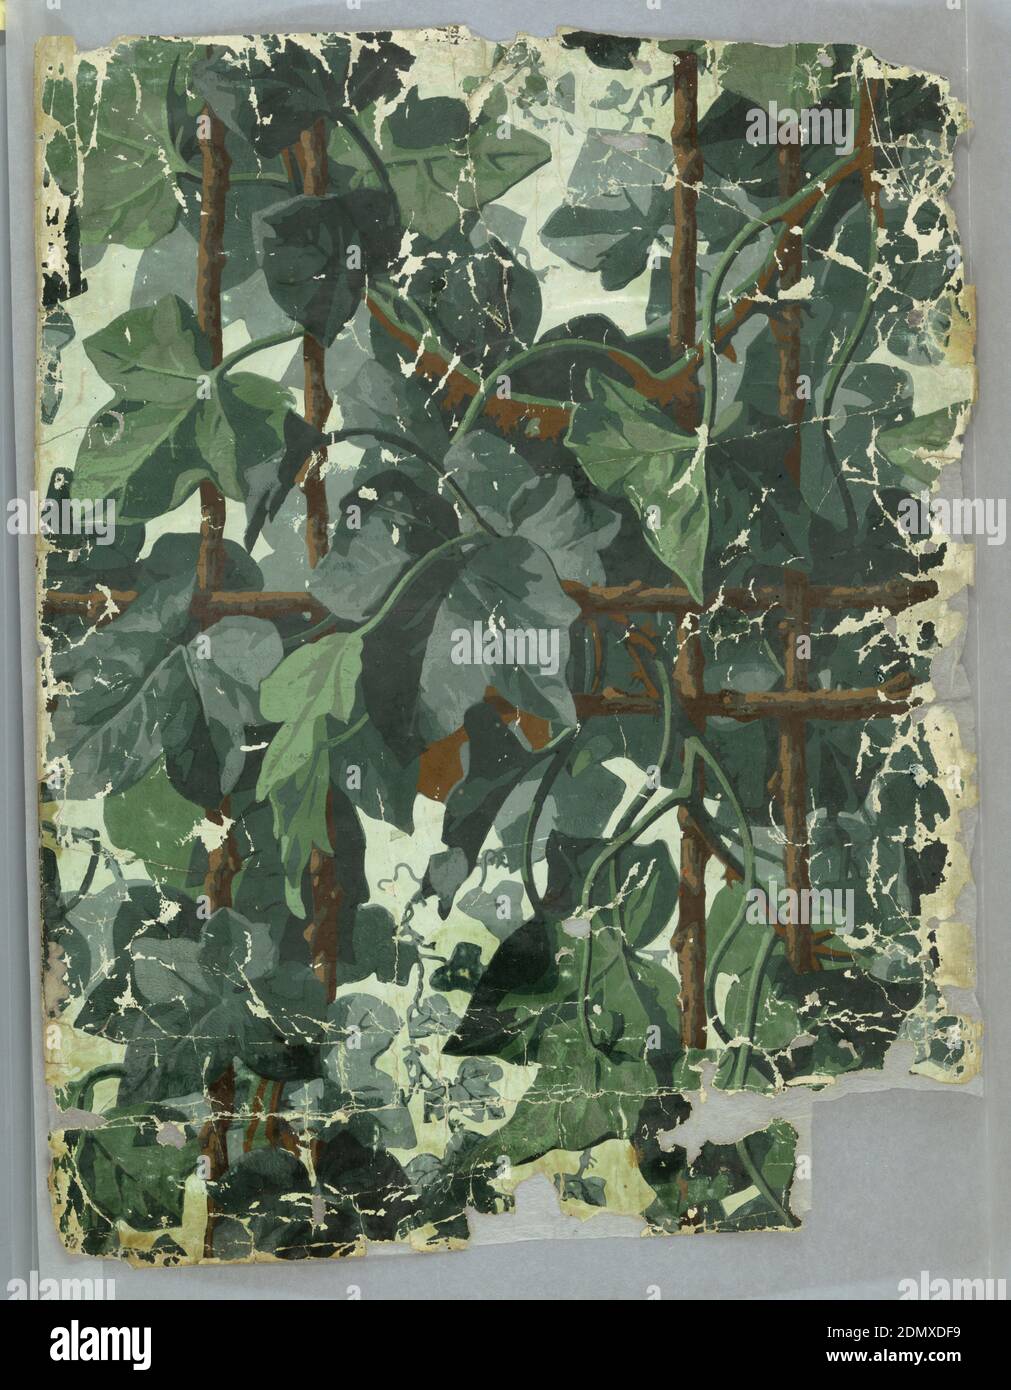 Sidewall, Desfossé et Karth, French, 1863, Block-printed paper, On white ground trellis work of thick brown branches with oversized ivy leaves entwined., Paris, France, 1850–60, Wallcoverings, Sidewall Stock Photo